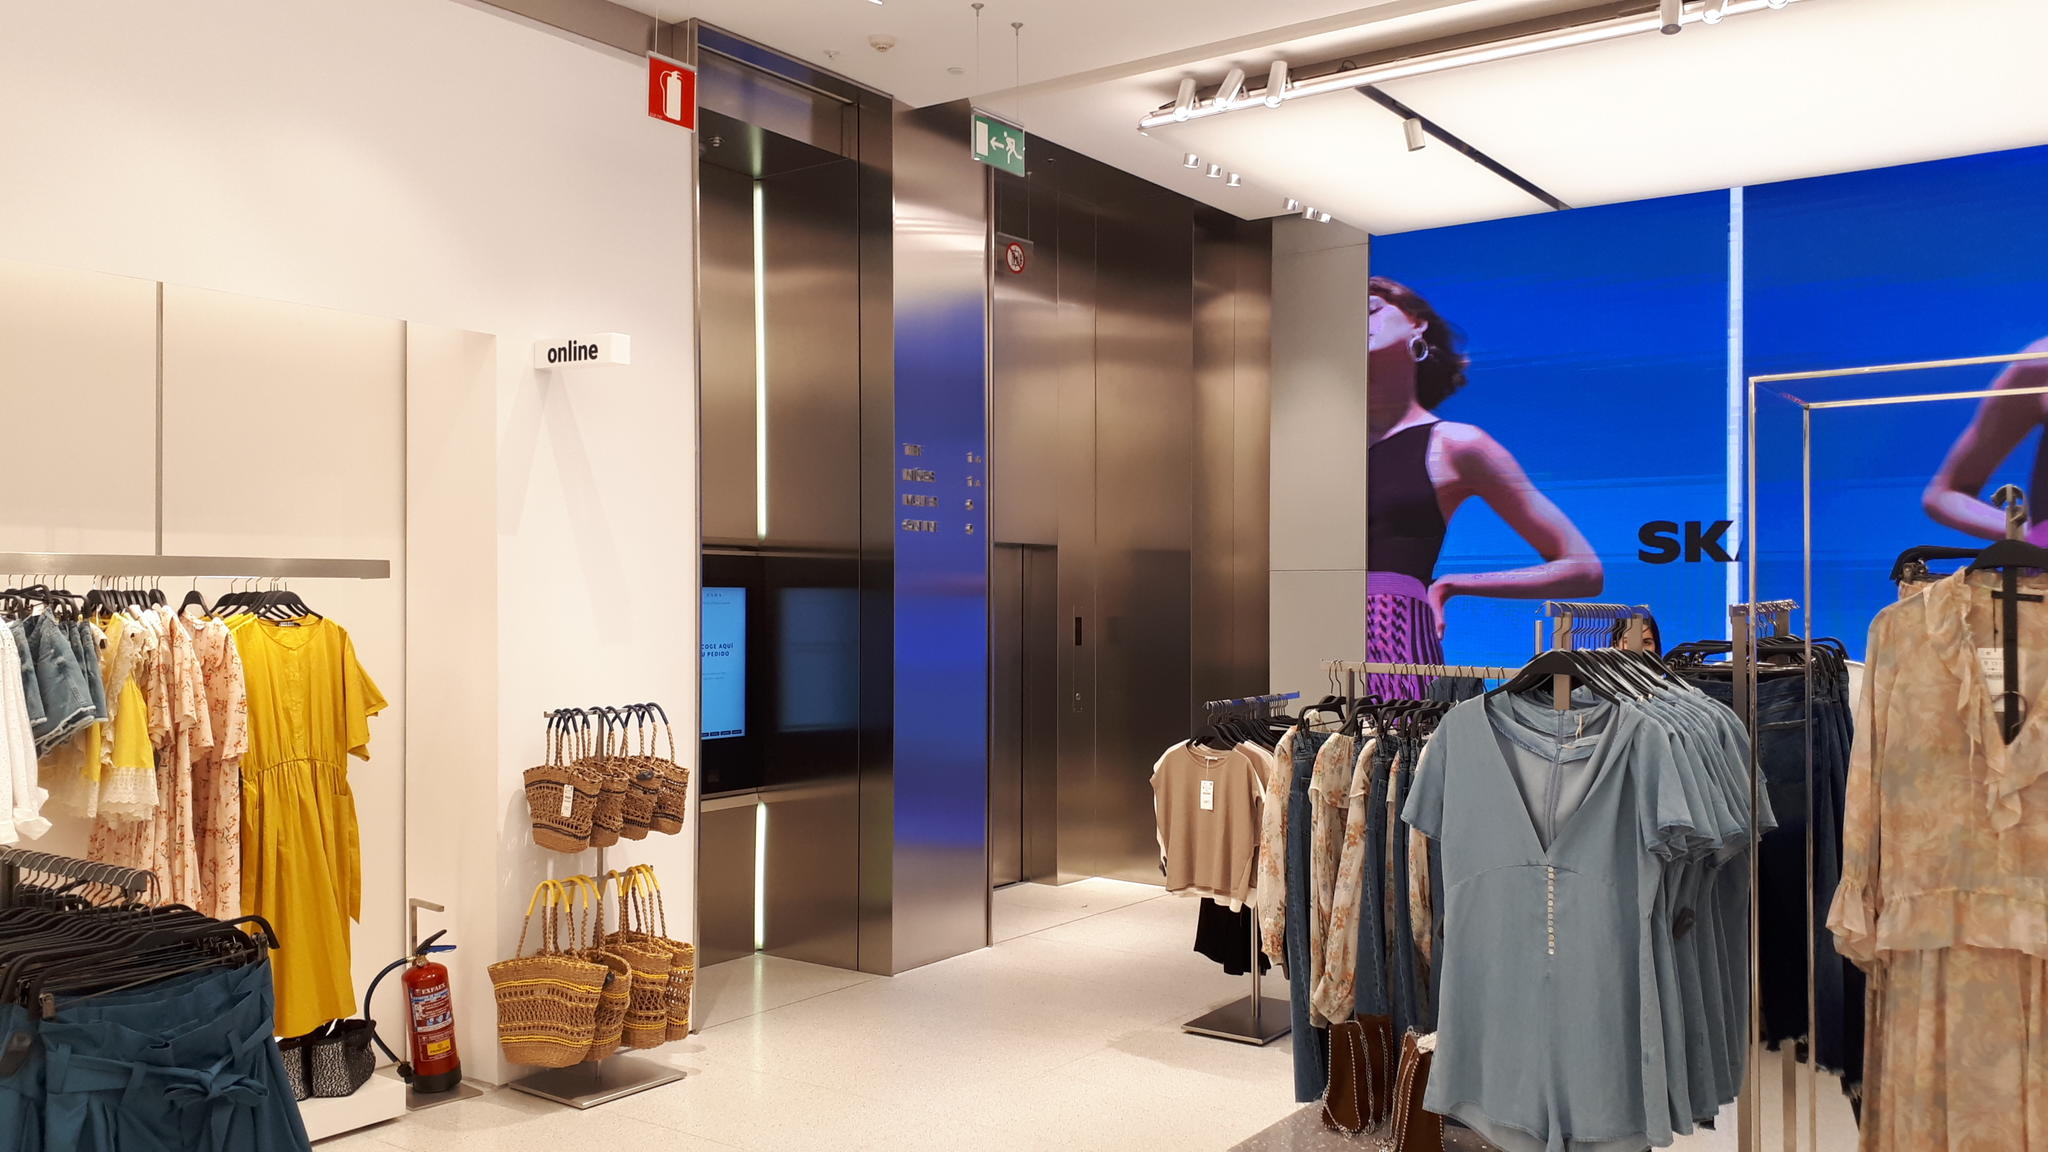 SPANISH-BASED INDITEX LAUNCHES ONLINE 